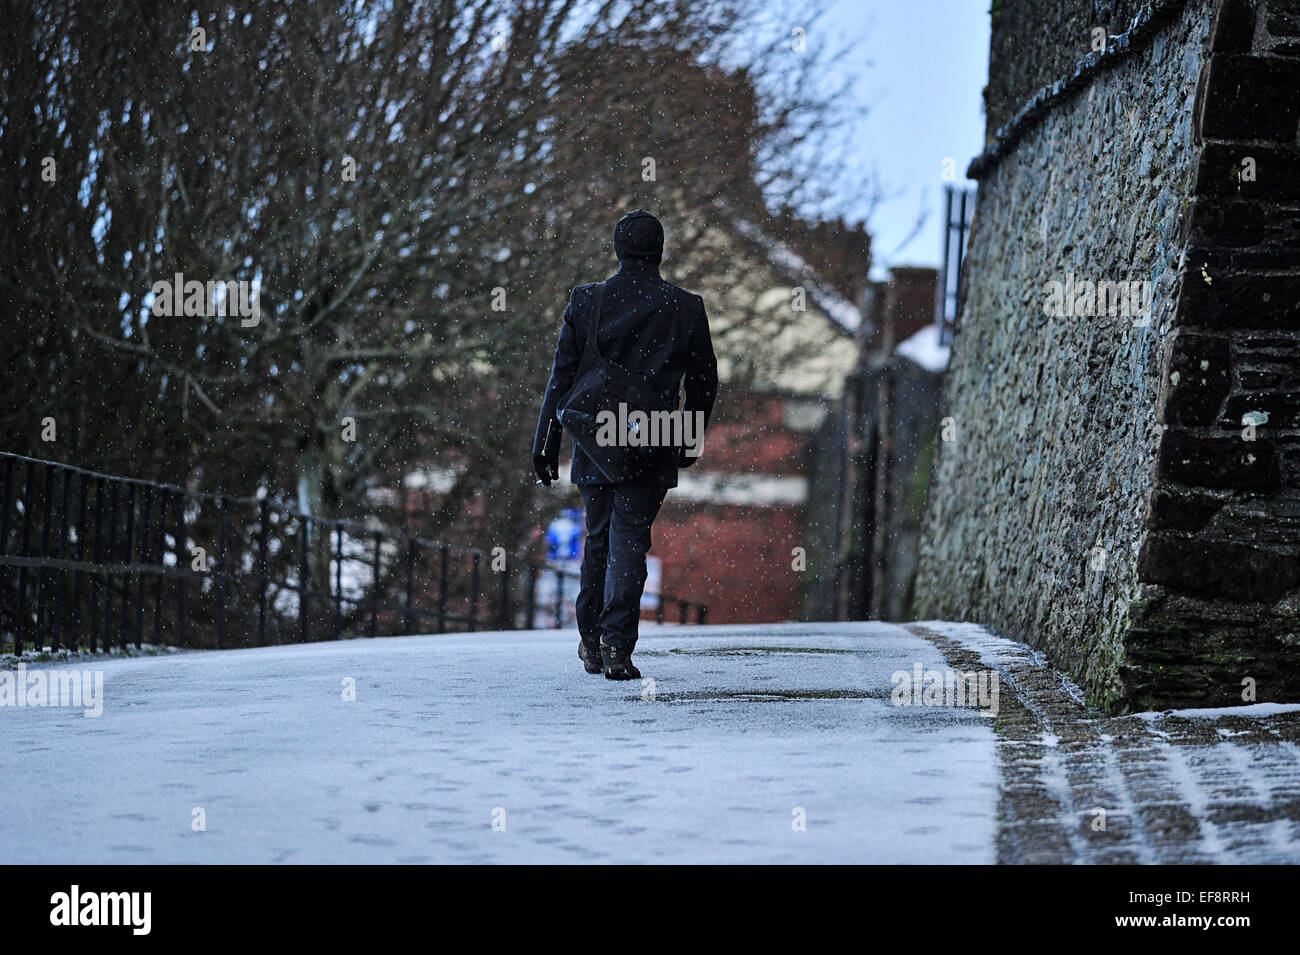 Londonderry, Northern Ireland. 29th January, 2015. UK weather: Snow in Londonderry.  A man walks across a snow covered path in Londonderry (Derry) in Northern Ireland. More snow is forecast for many parts of Northern Ireland and Britain tomorrow Credit:  George Sweeney/Alamy Live News Stock Photo